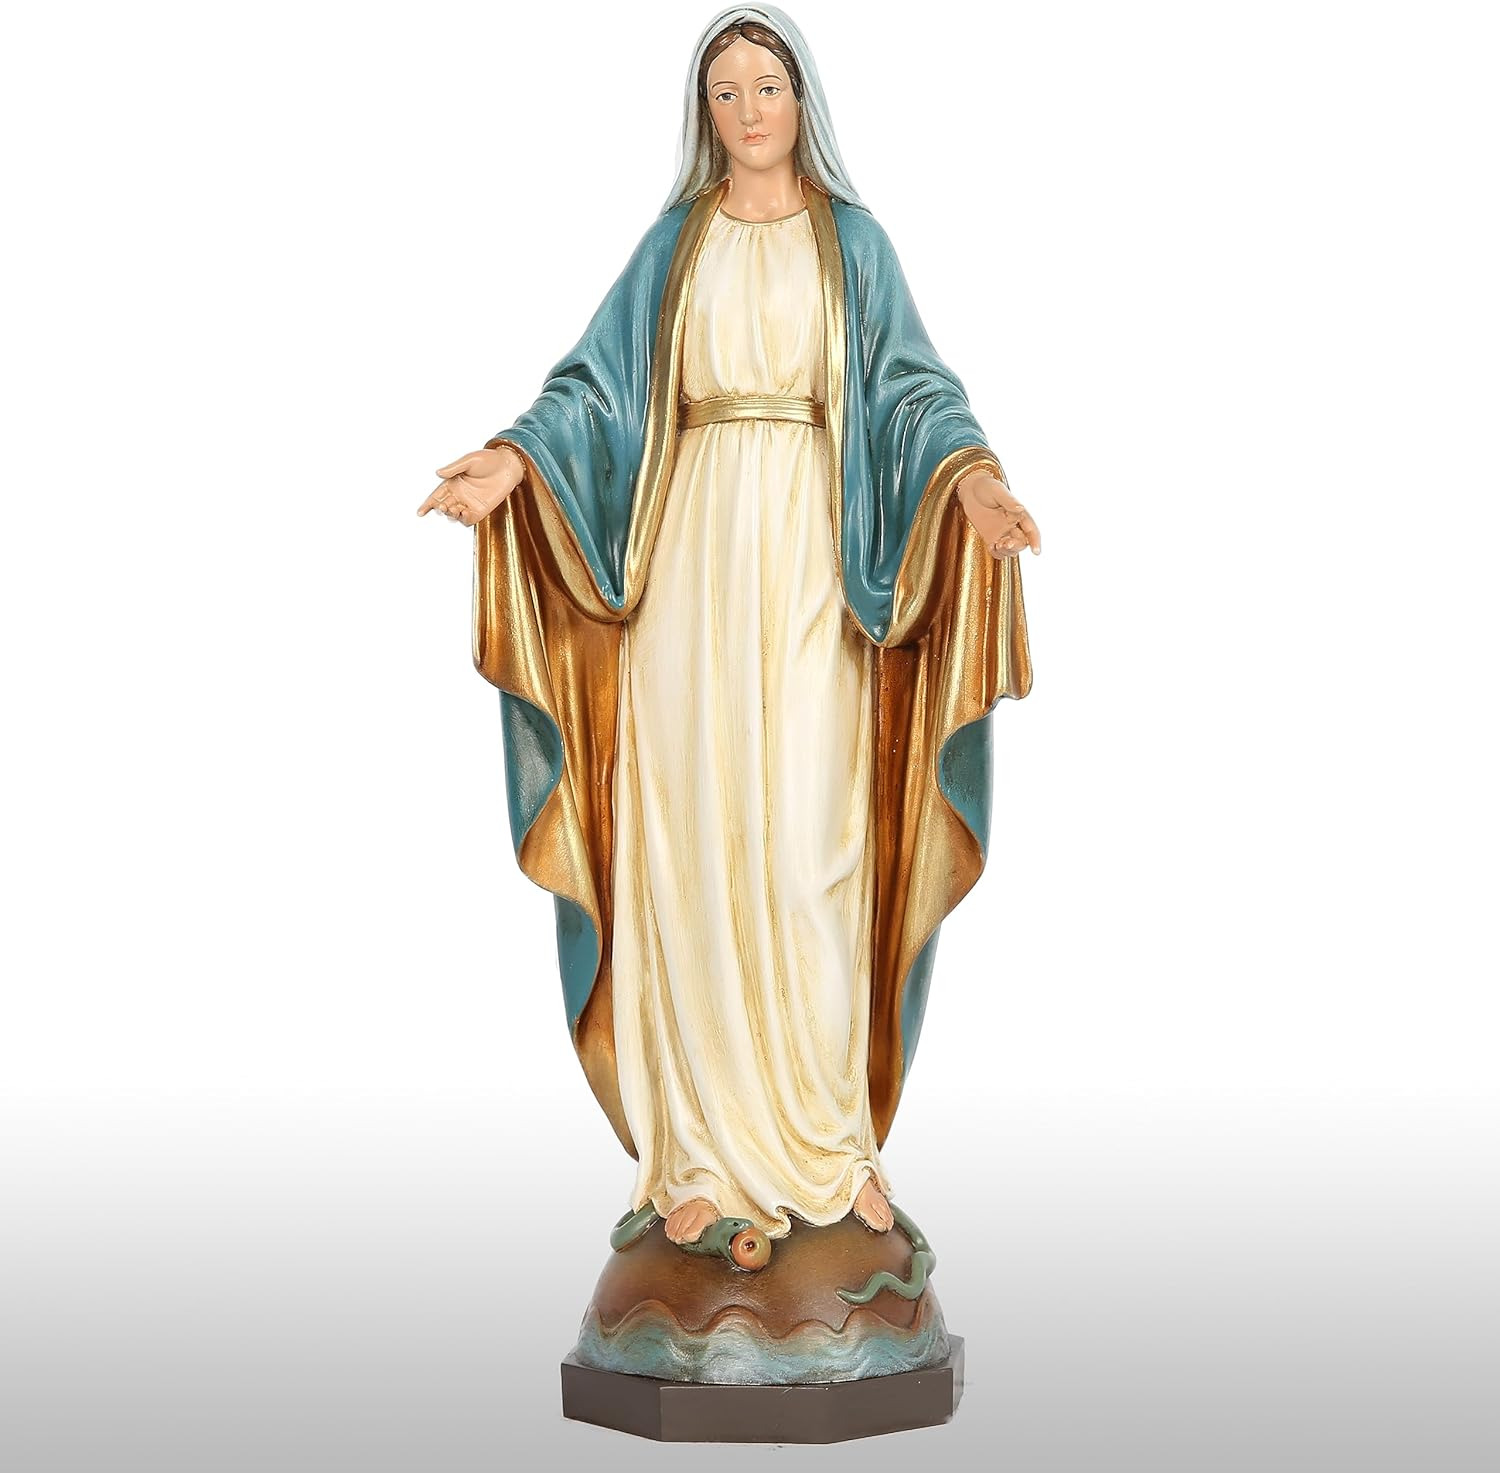 Catholic Our Lady of Grace Statue，Virgin Mary Figure, Religious Gfit of Home Dec